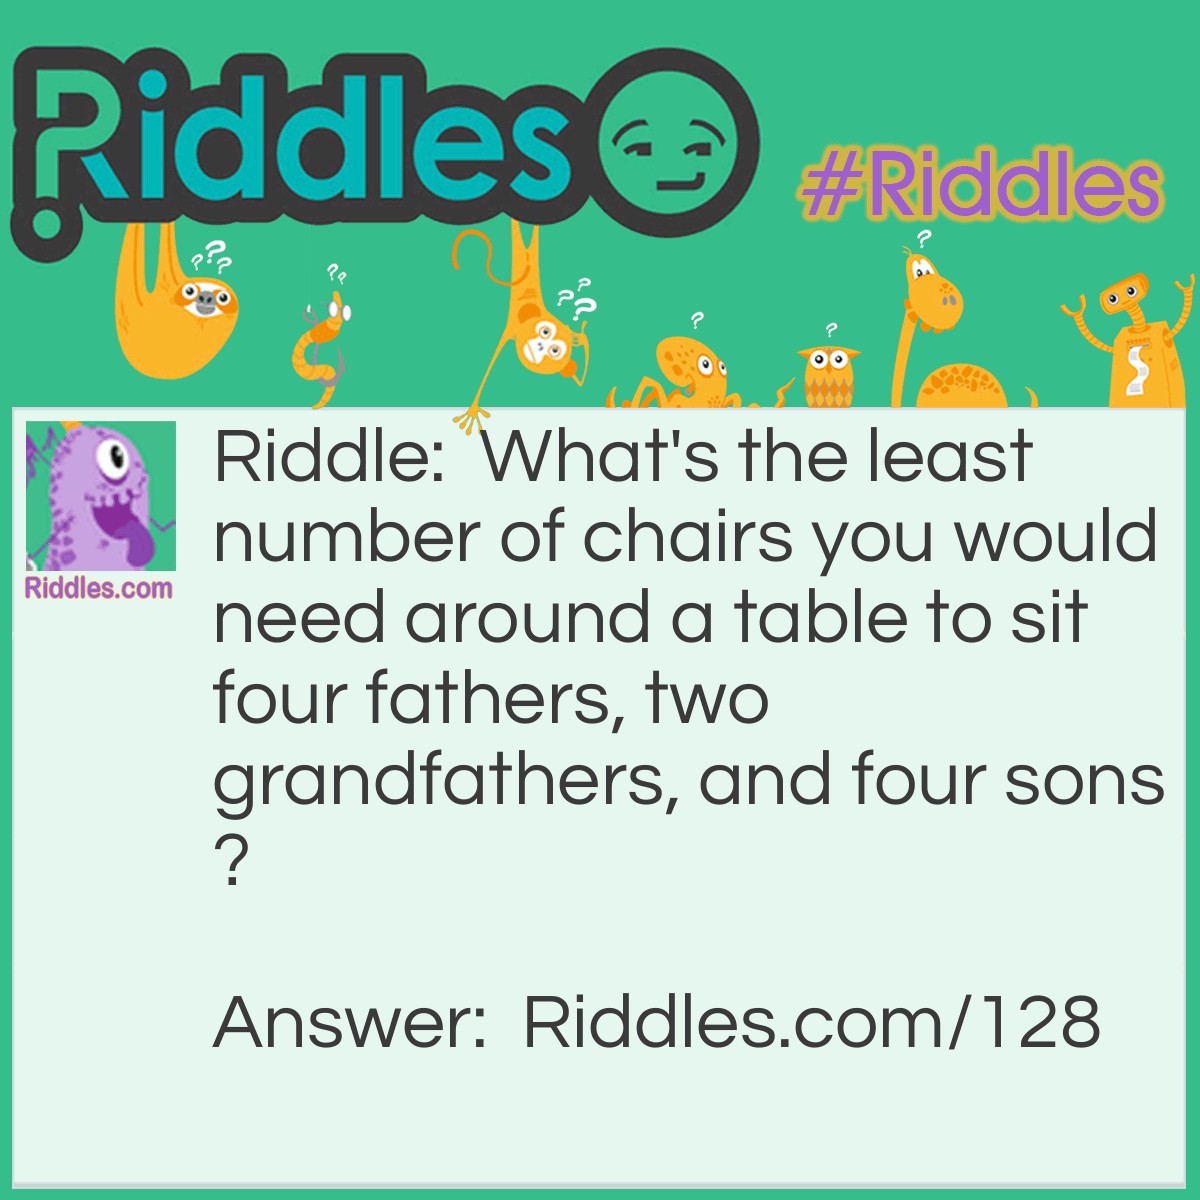 Riddle: What's the least number of chairs you would need around a table to sit four fathers, two grandfathers, and four sons? Answer: Four. The four fathers could be grandfathers and are definitely sons already.